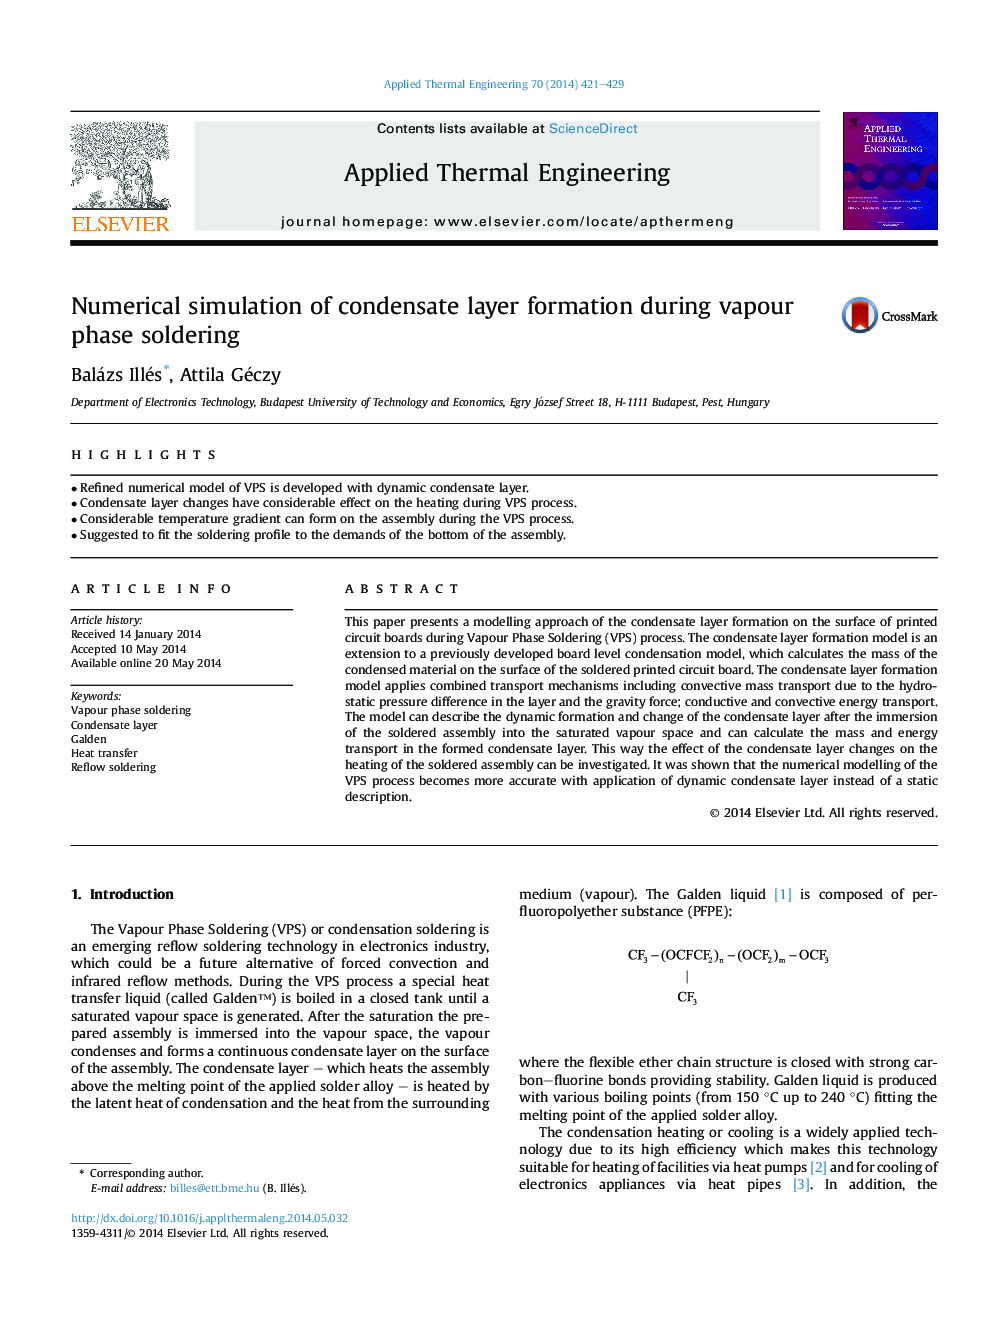 Numerical simulation of condensate layer formation during vapour phase soldering